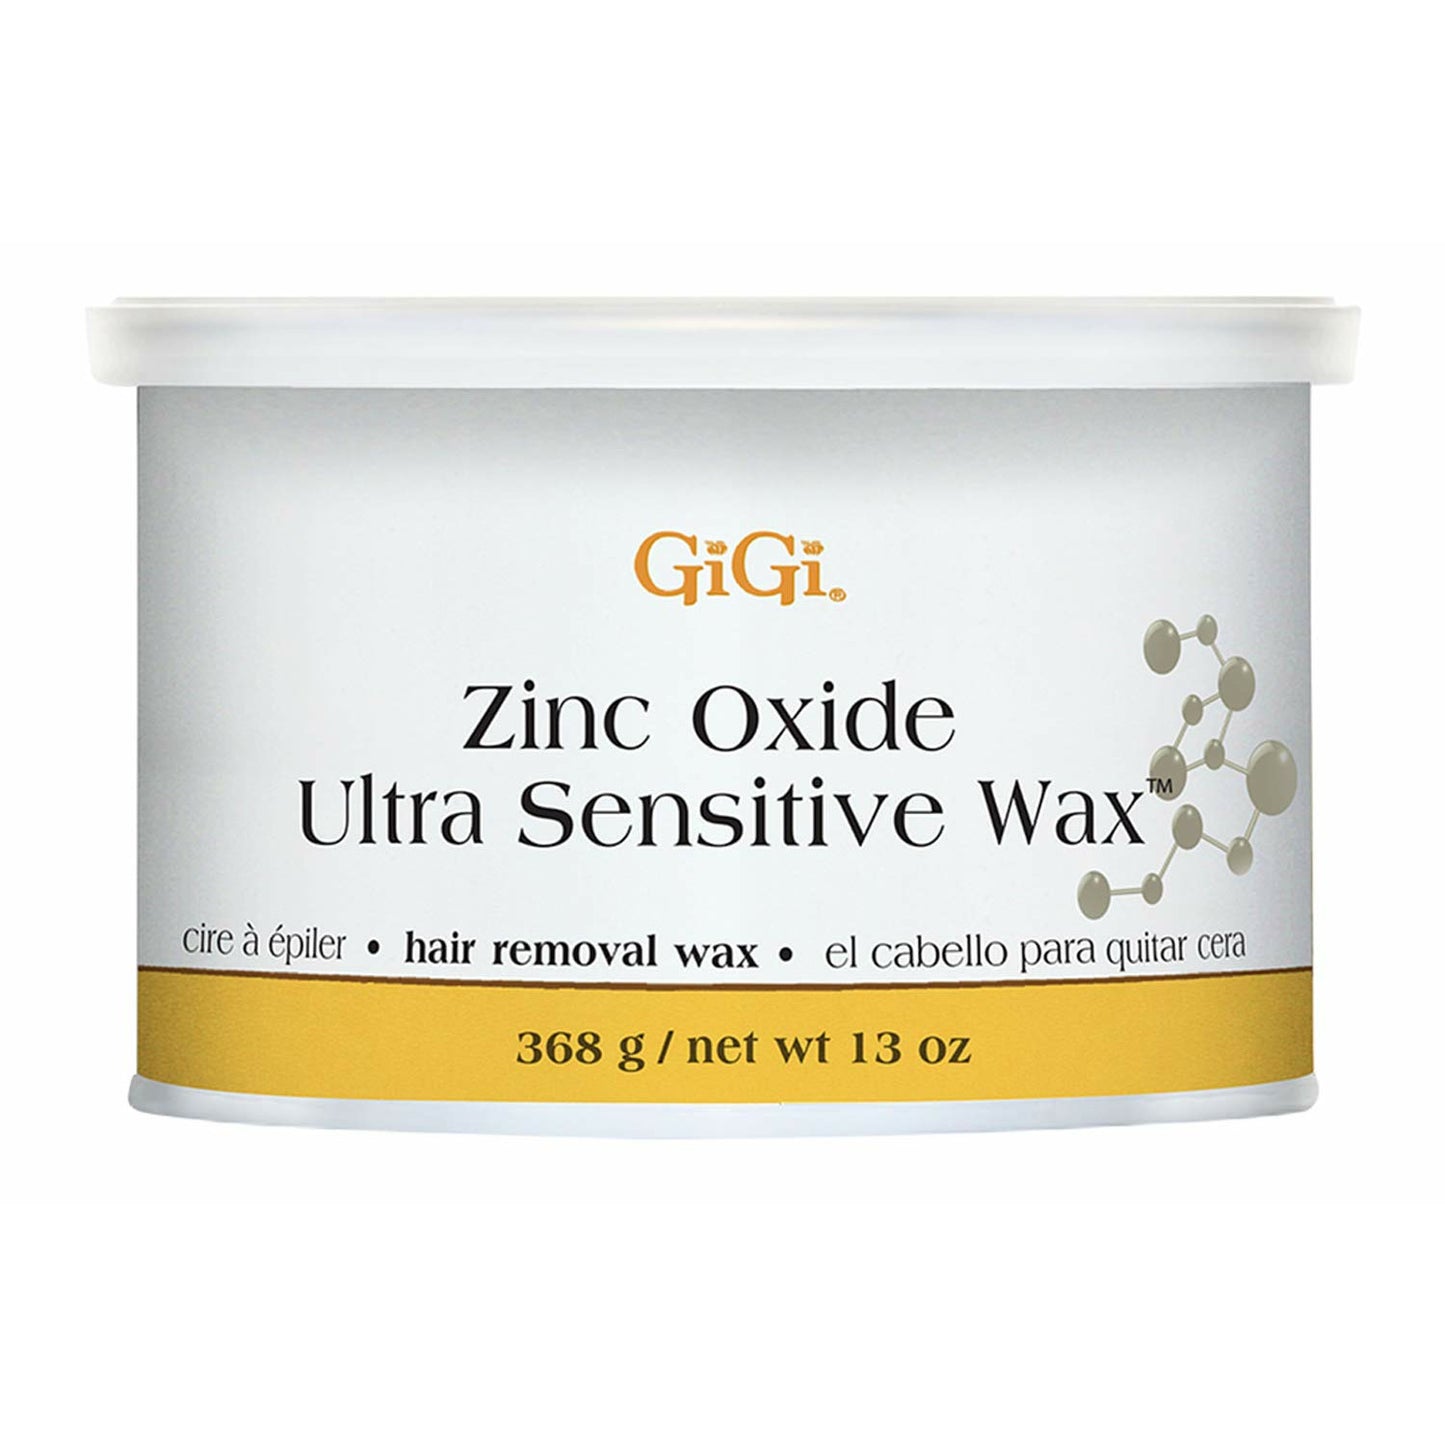 GiGi Zinc Oxide Ultra Sensitive Hair Removal Wax, Gentle and on Extra-Delicate Skin